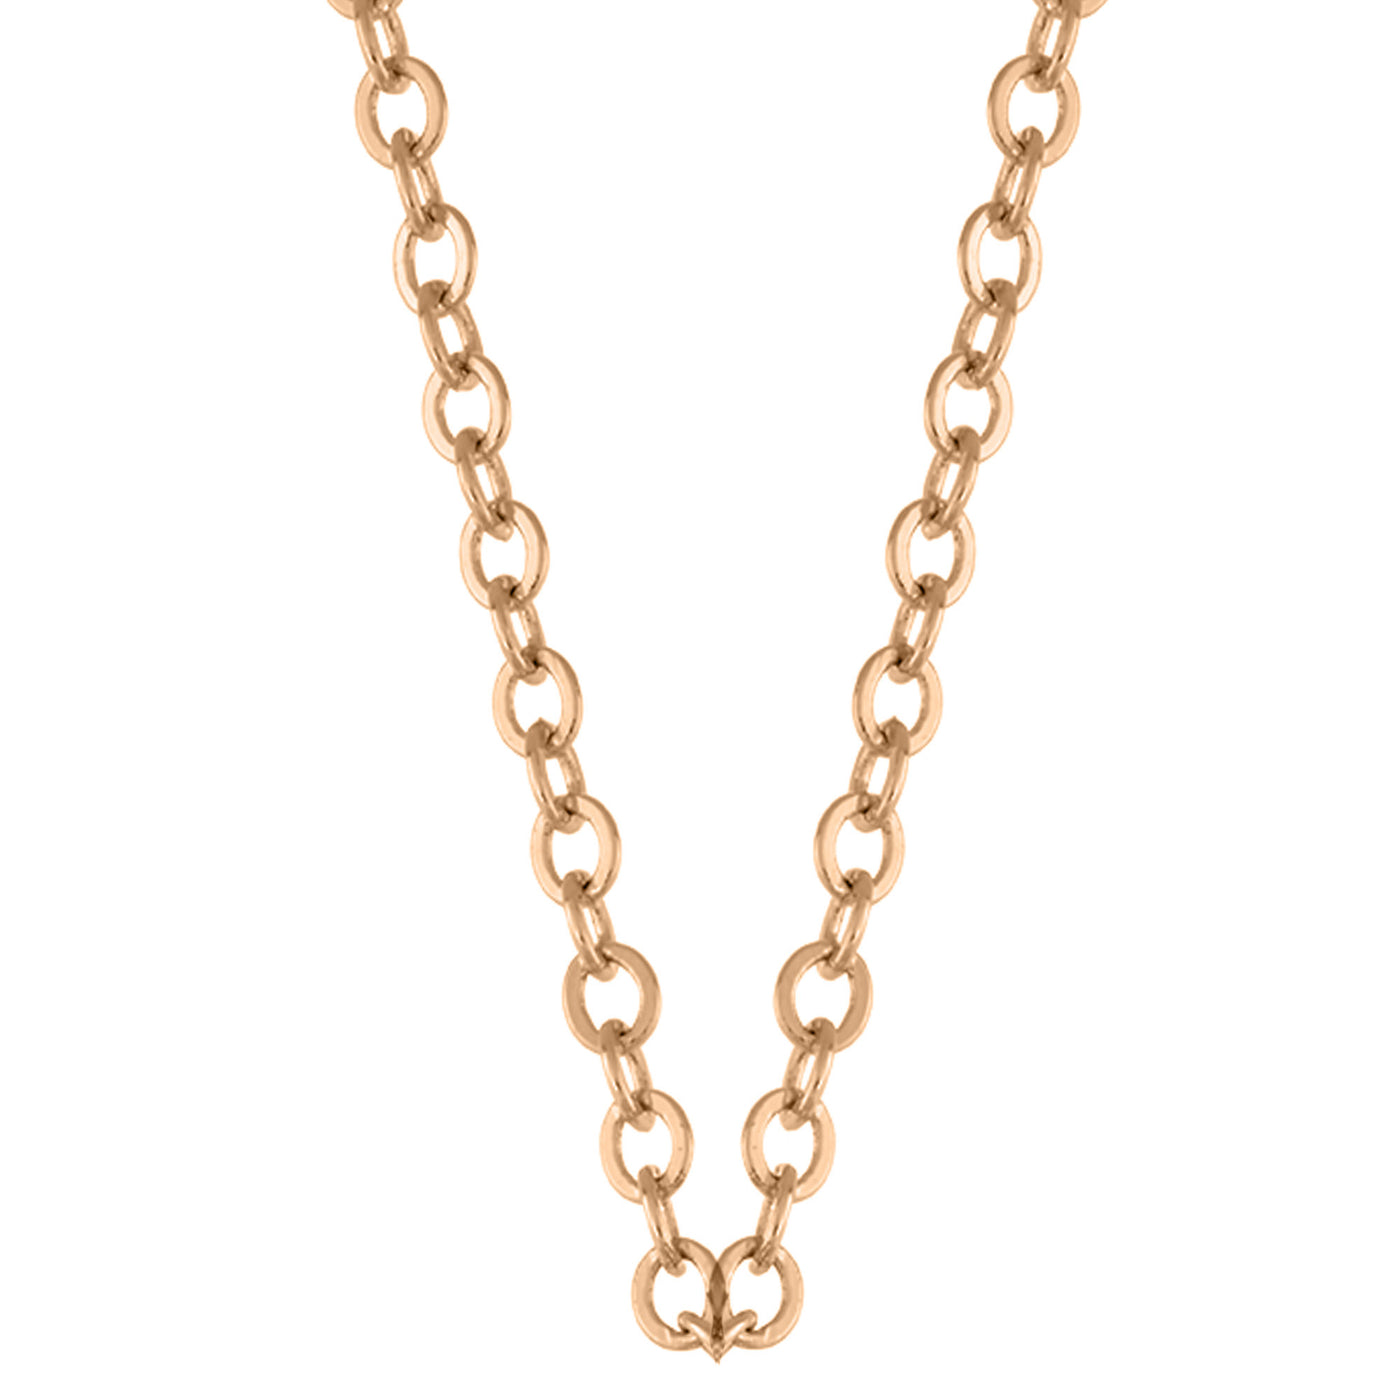 Rebecca Sloane Rose Gold Plated Silver Large Chain Links Necklace